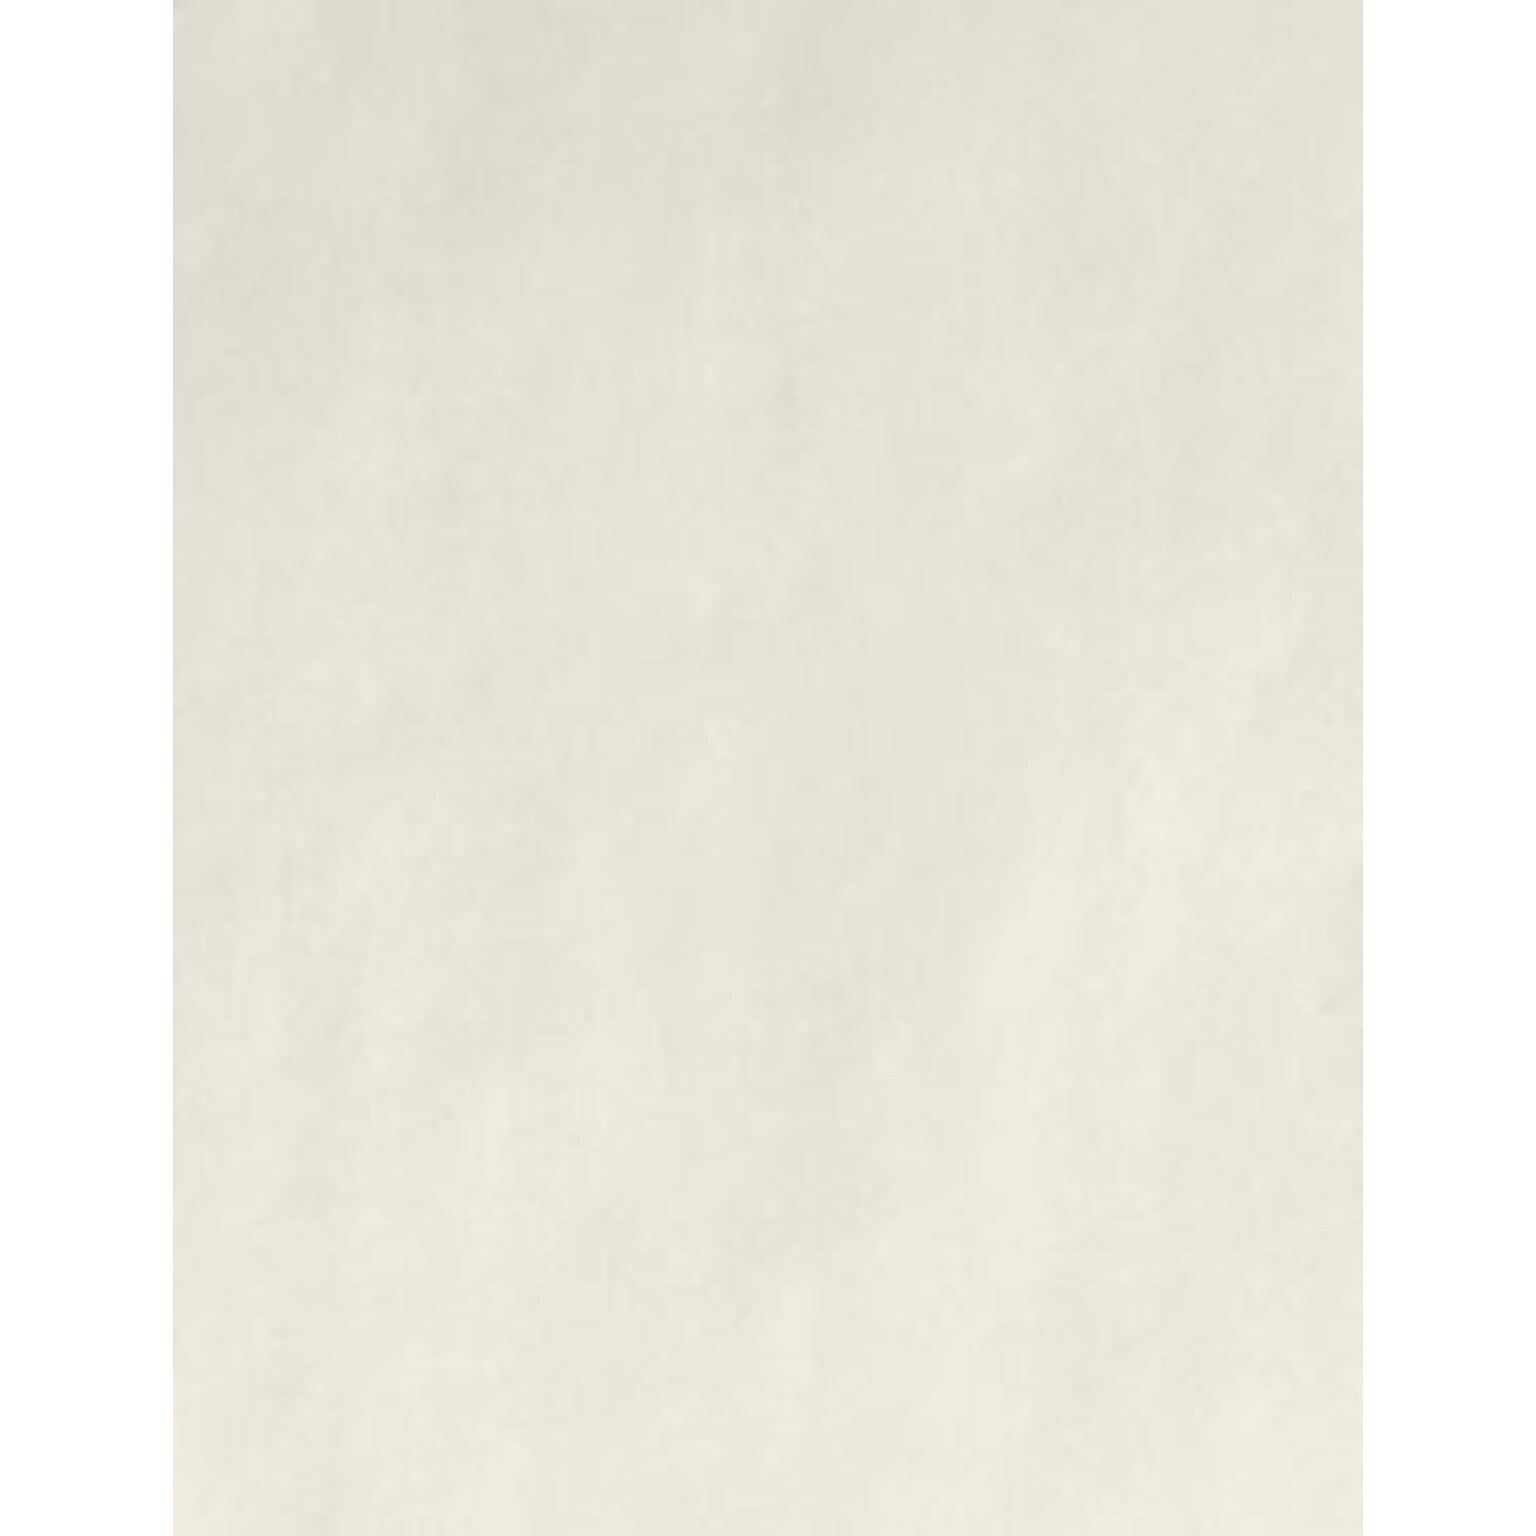 LUX® Cardstock, 11 x 17, 100 lb. Natural, 50 Qty (1117-C-N-50)